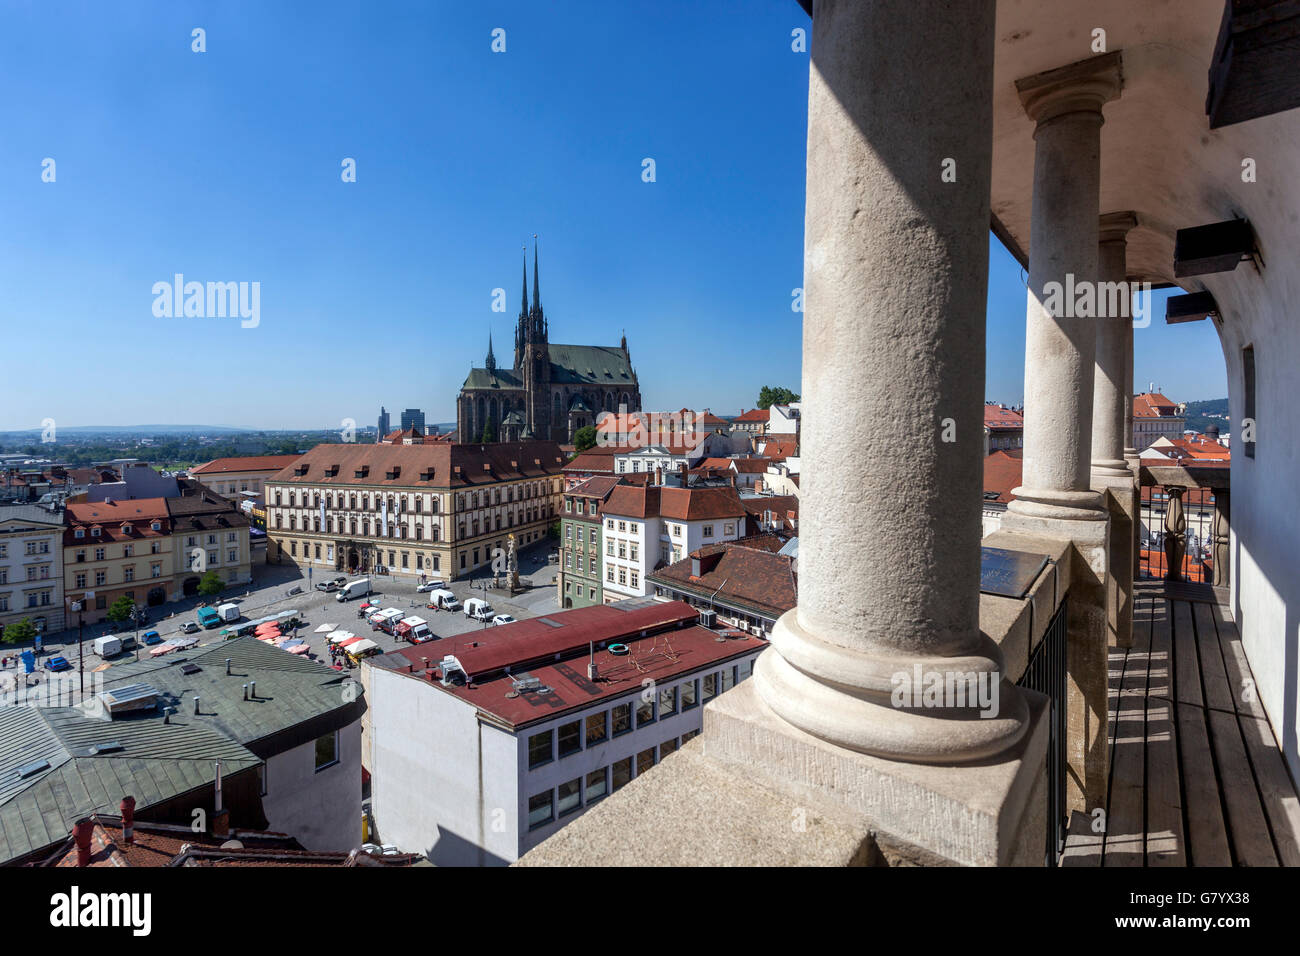 Cityscape, Zelny Trh Square (Cabbage Market) and Cathedral view from Observation Tower of the Old Town Hall, Corridor Balcony Brno Czech Republic Stock Photo